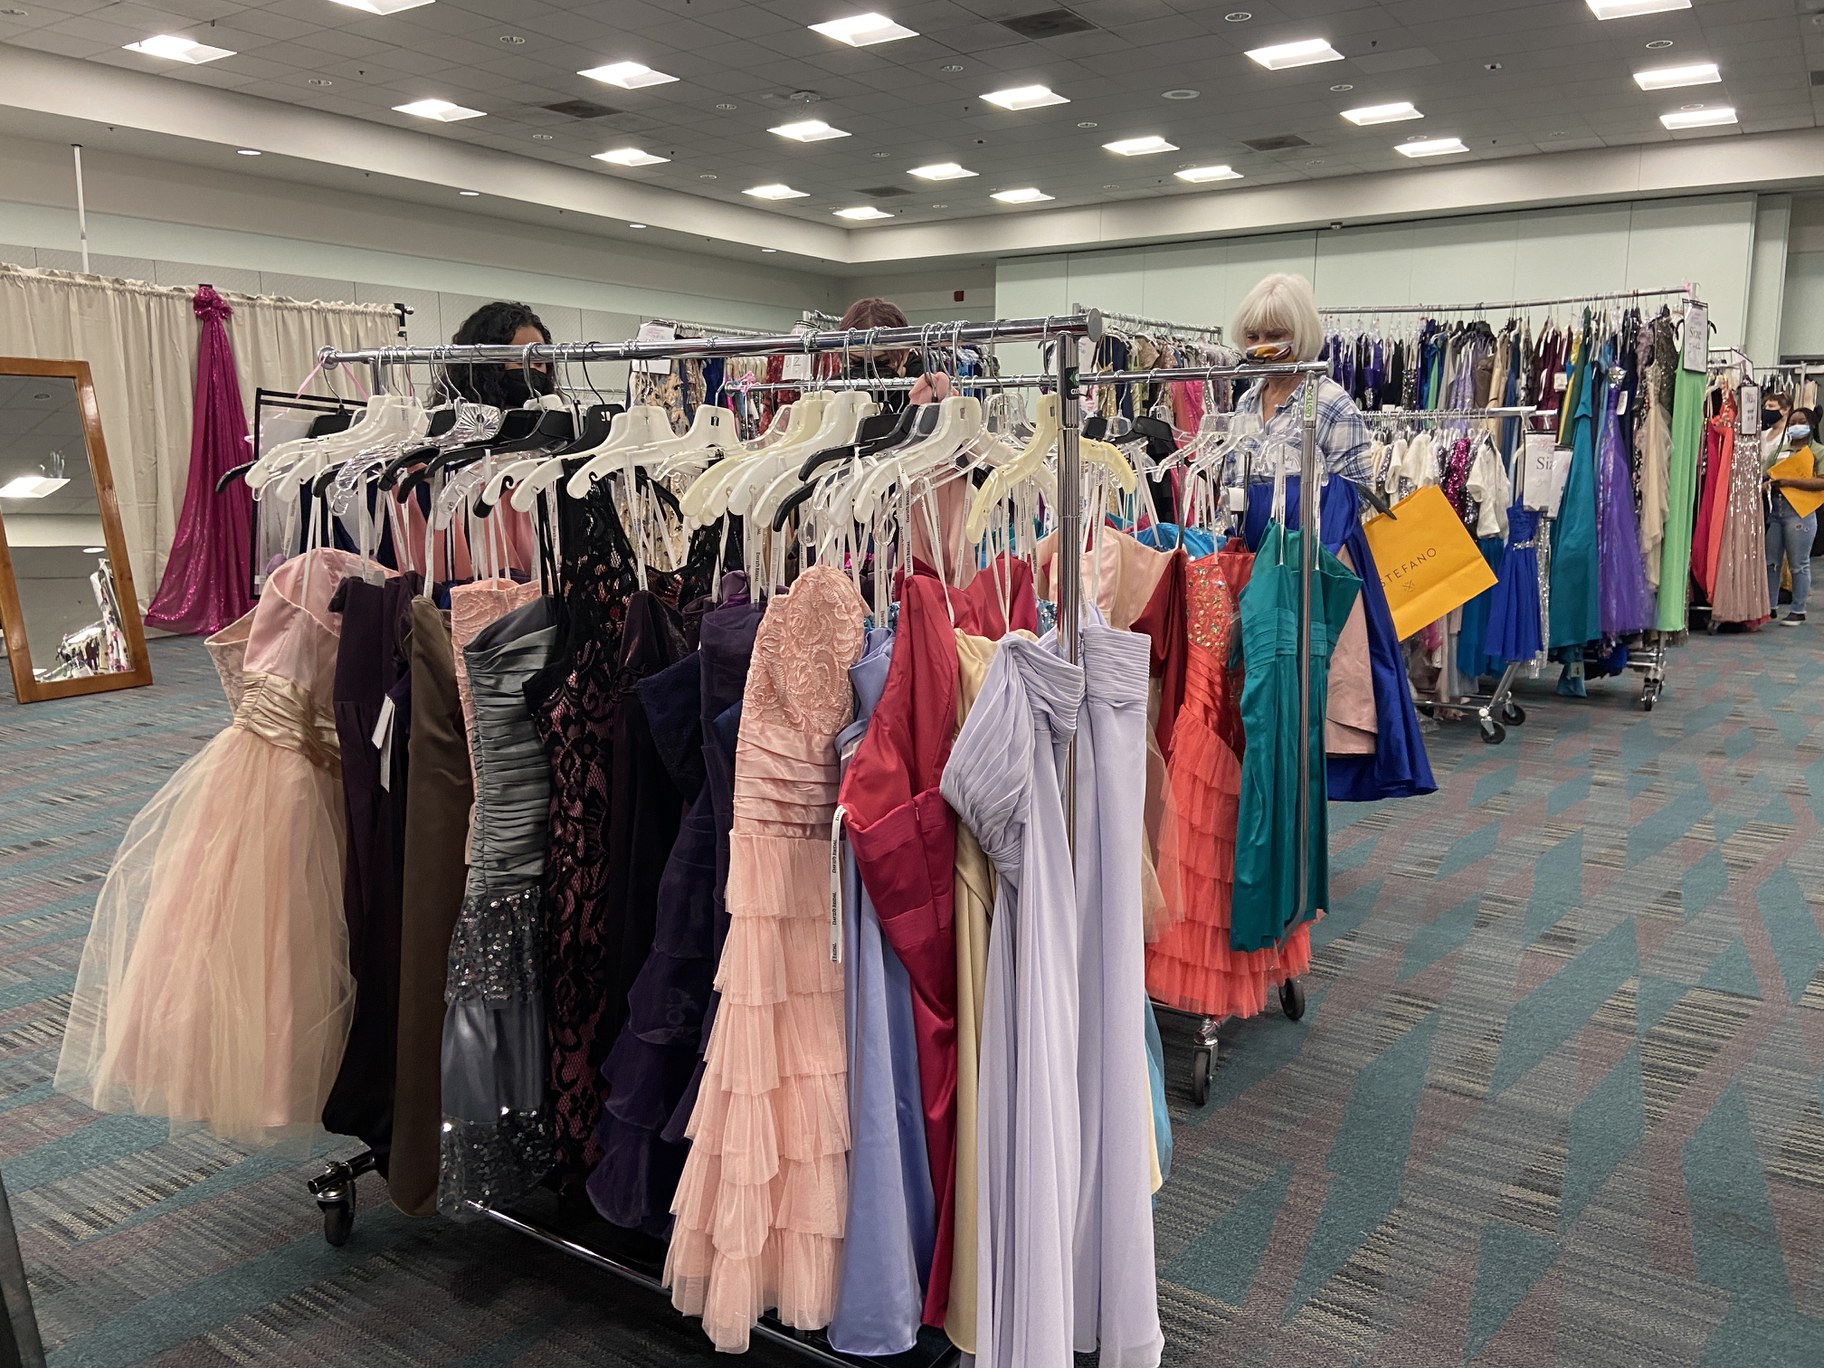 Donated prom dresses help students in need